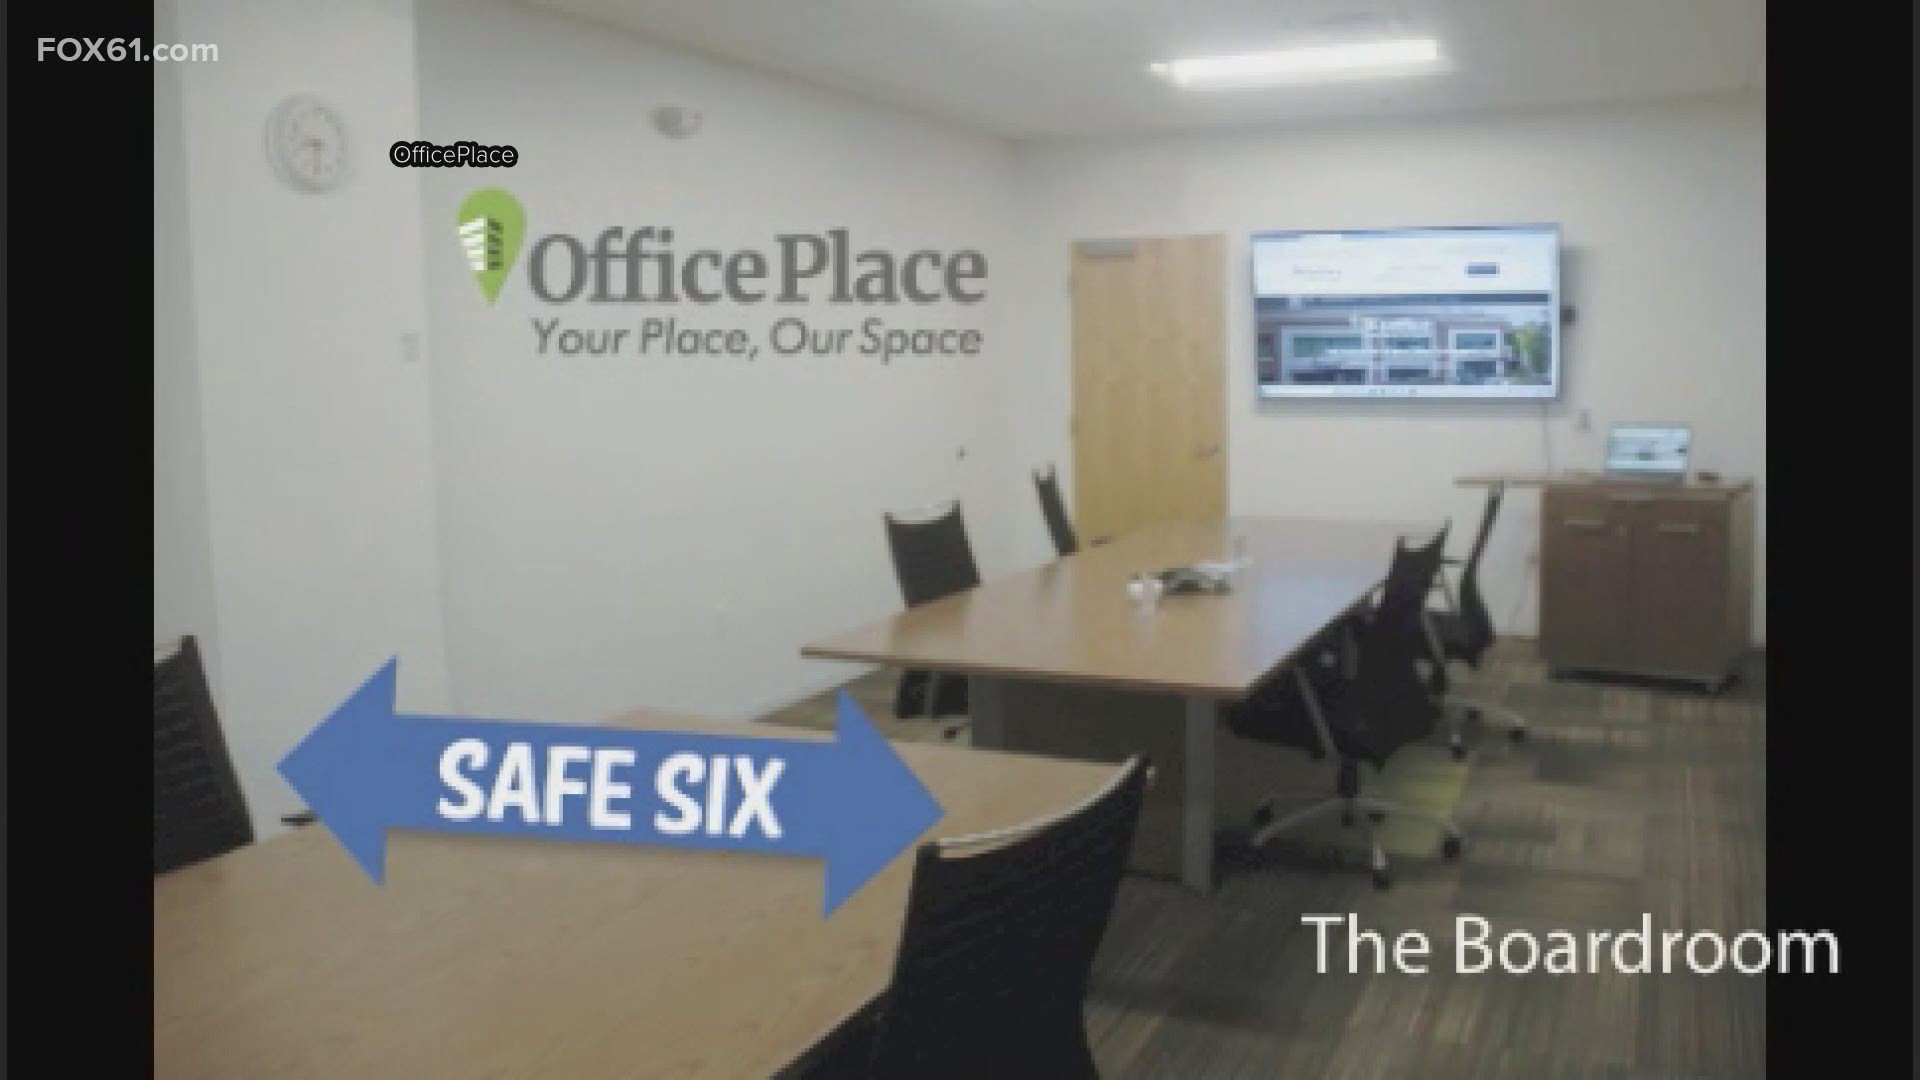 In the midst of the pandemic, OfficePlace has made changes to keep its customers safe.